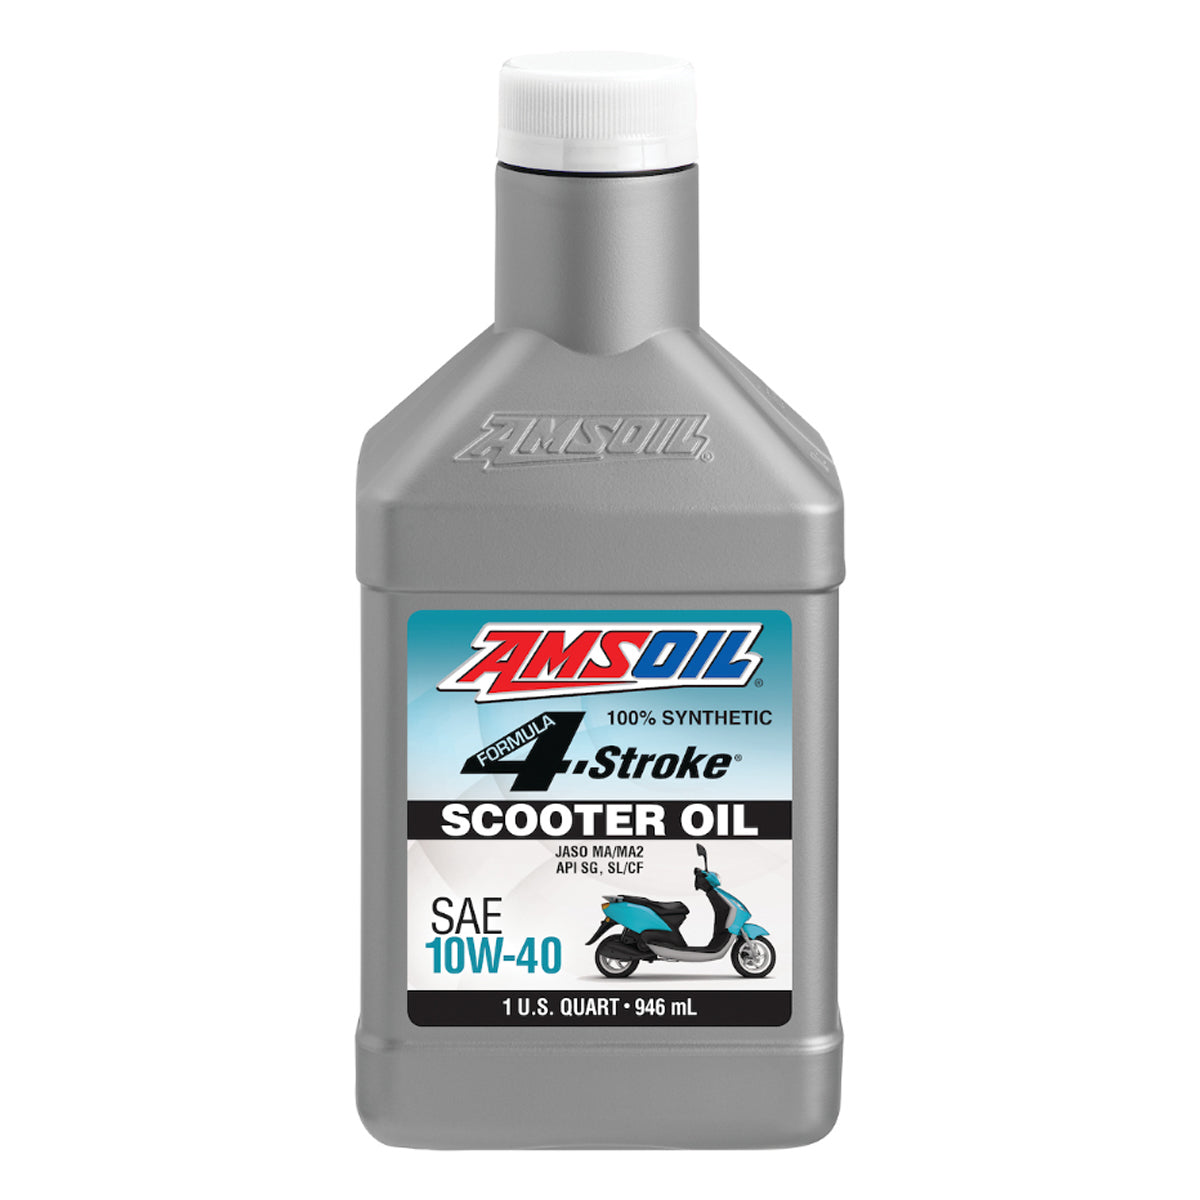 AMSOIL FORMULA 4-STROKE SYNTHETIC SCOOTER OIL